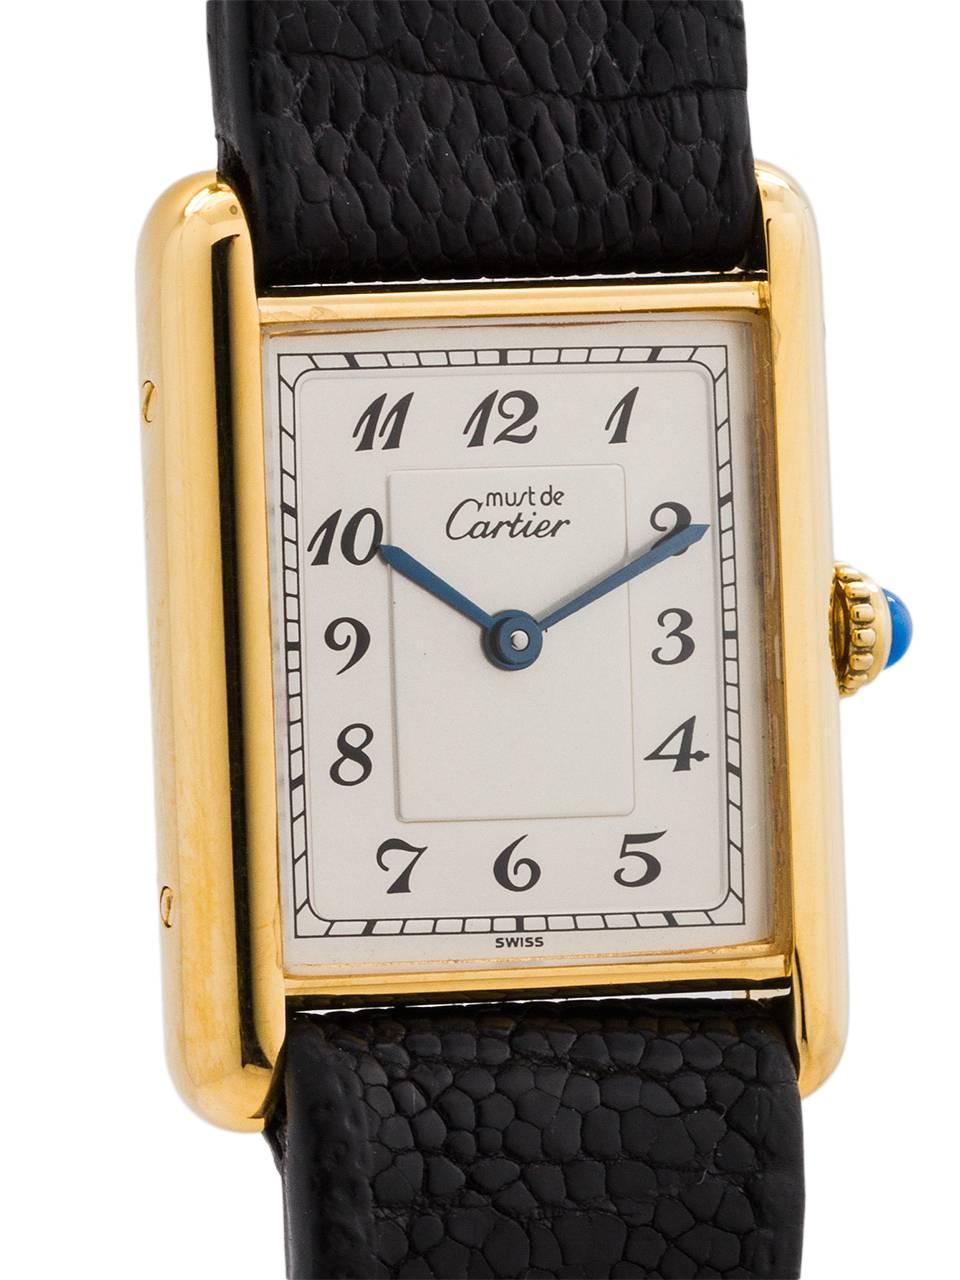 
Cartier man’s vermeil Tank Louis circa 1990s. Featuring a 23.5 X 31mm case secured by 4 side and 4 caseback screws. Featuring original, beautiful, silver dial with sunken breguet numerals, and signed Must de Cartier, with blued steel hands, and